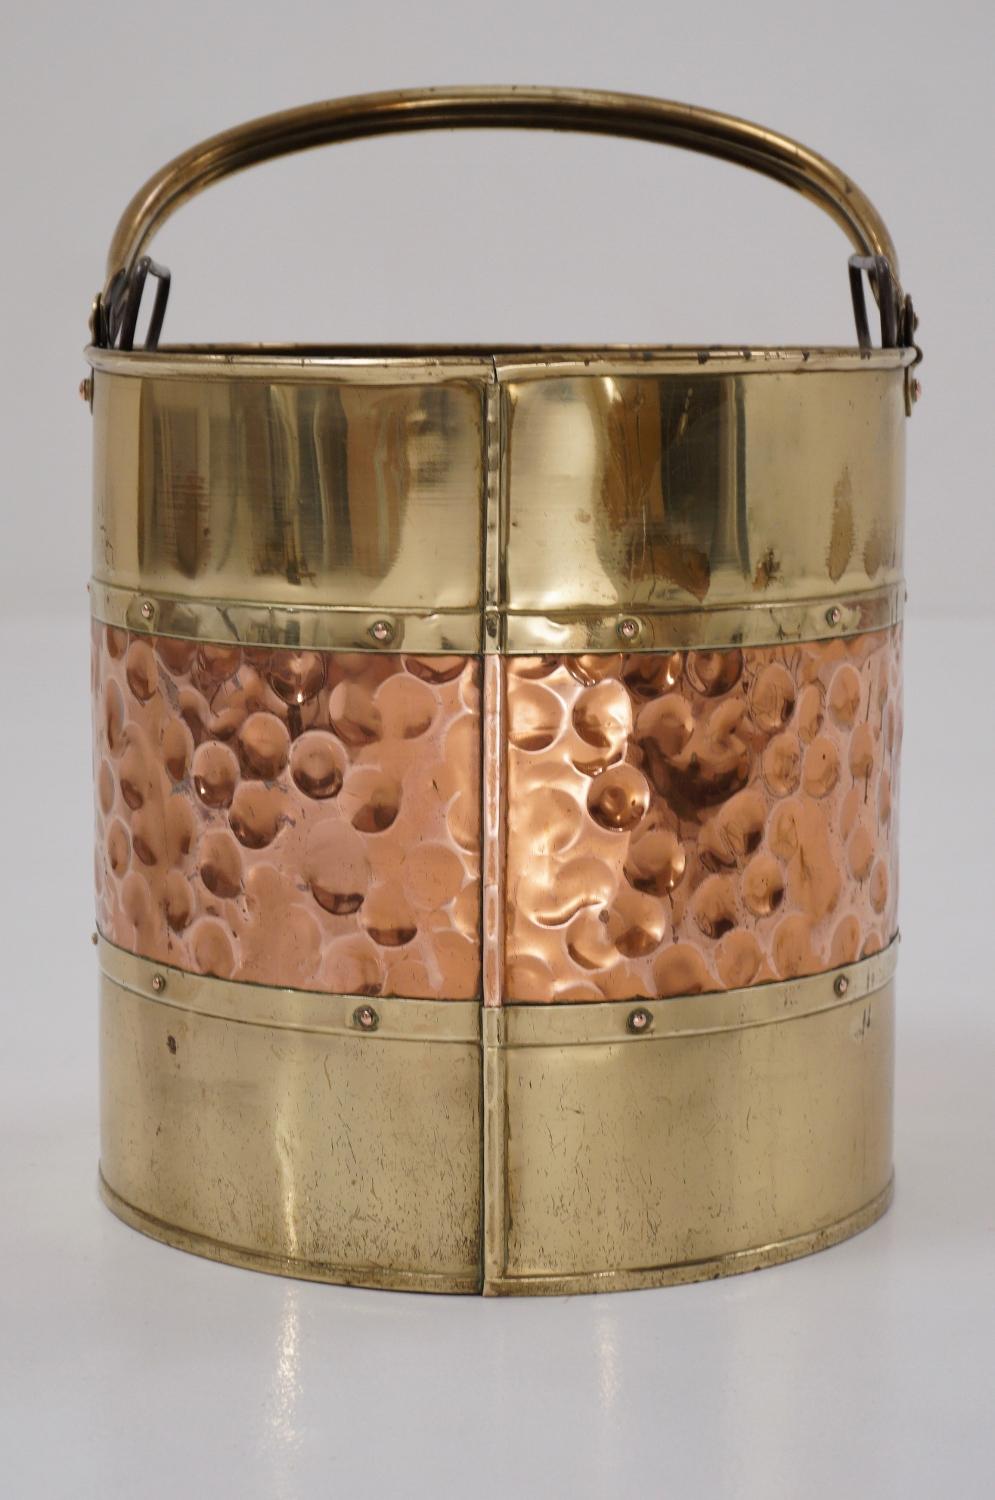 Antique Brass Bucket/Bin 'Coal Scuttle' with Copper Banding, circa 1900s English For Sale 2